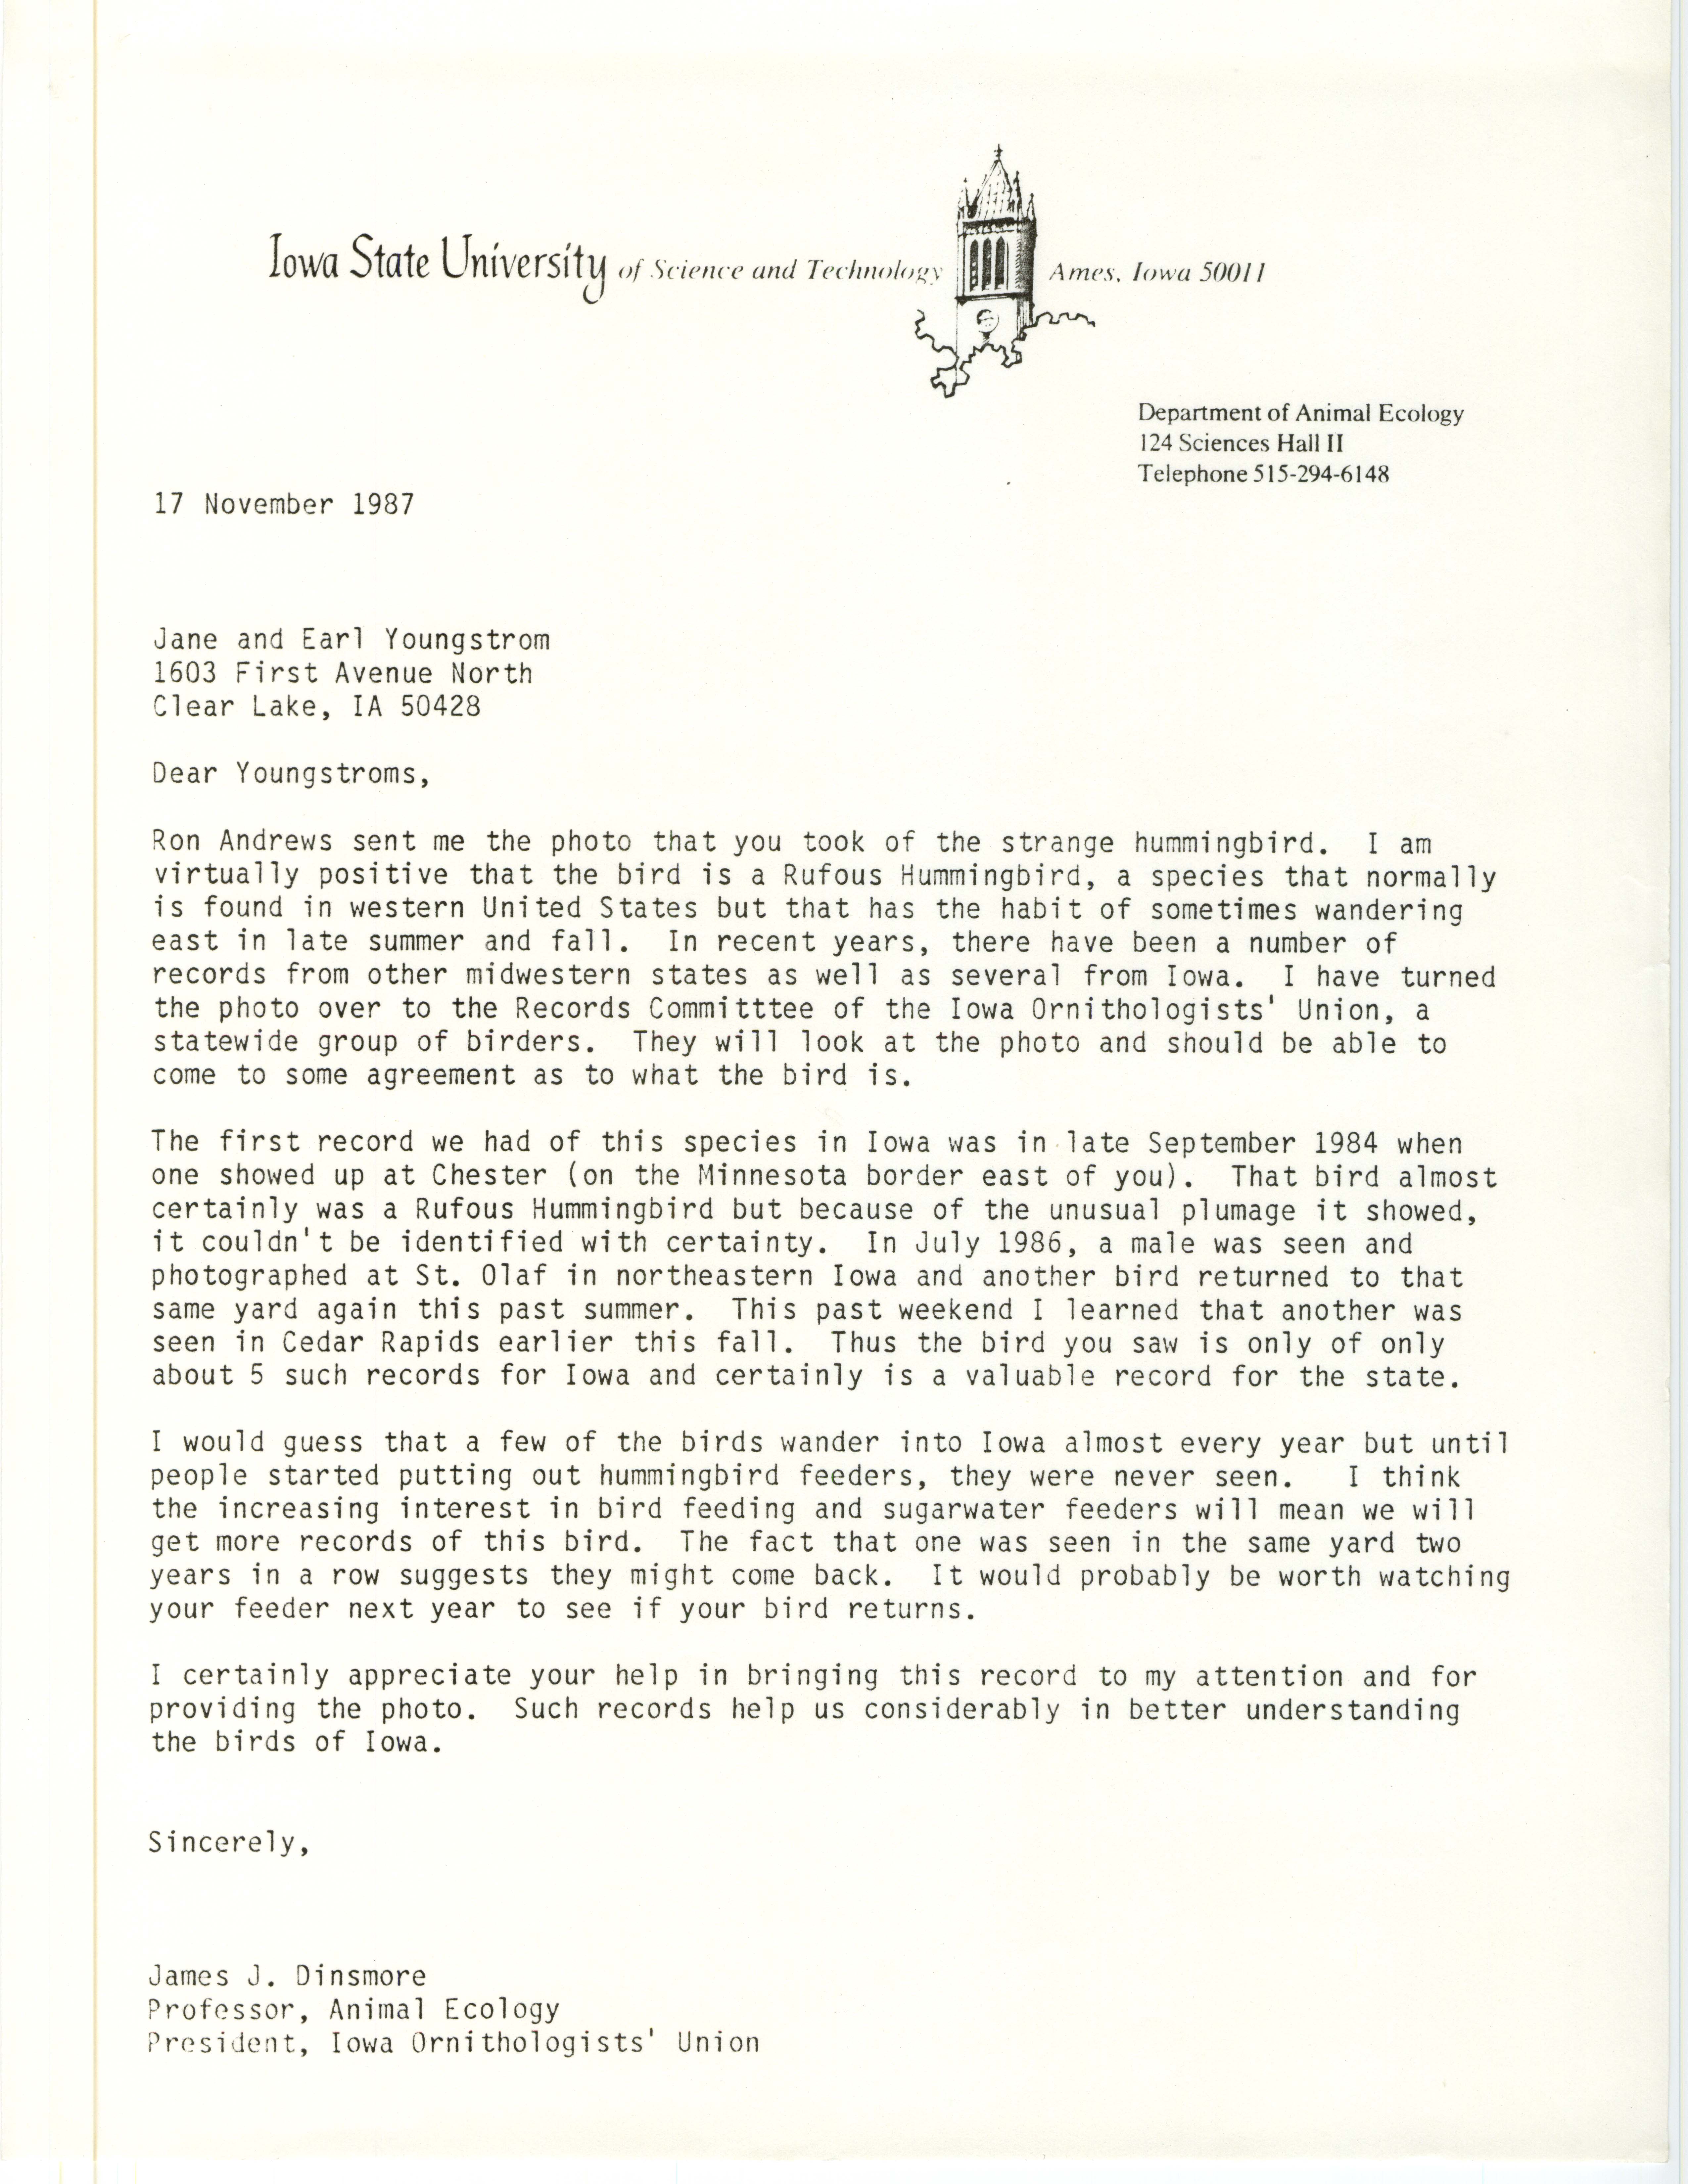 James J. Dinsmore letter to Jane Youngstrom and Earl Youngstrom regarding a Rufous Hummingbird sighting, November 17, 1987